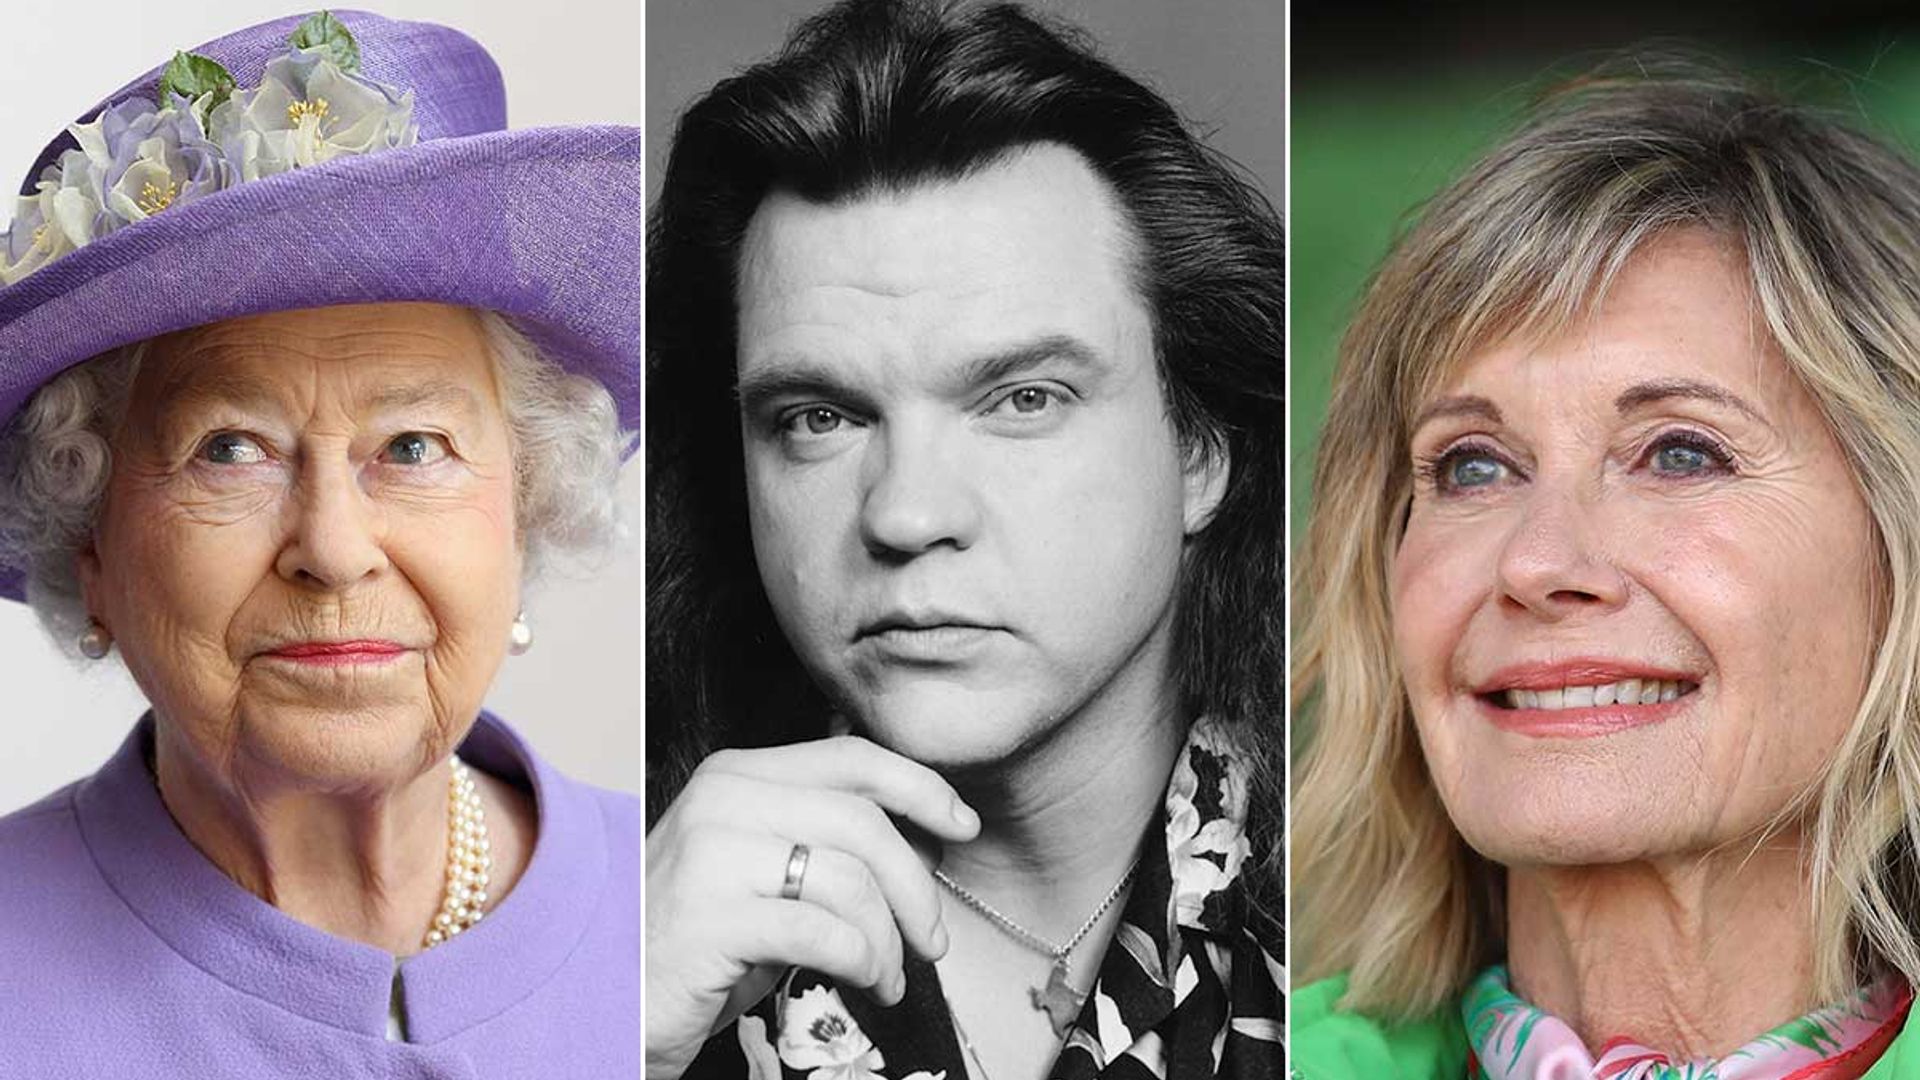 2022 celebrity deaths Remembering the famous faces we lost including